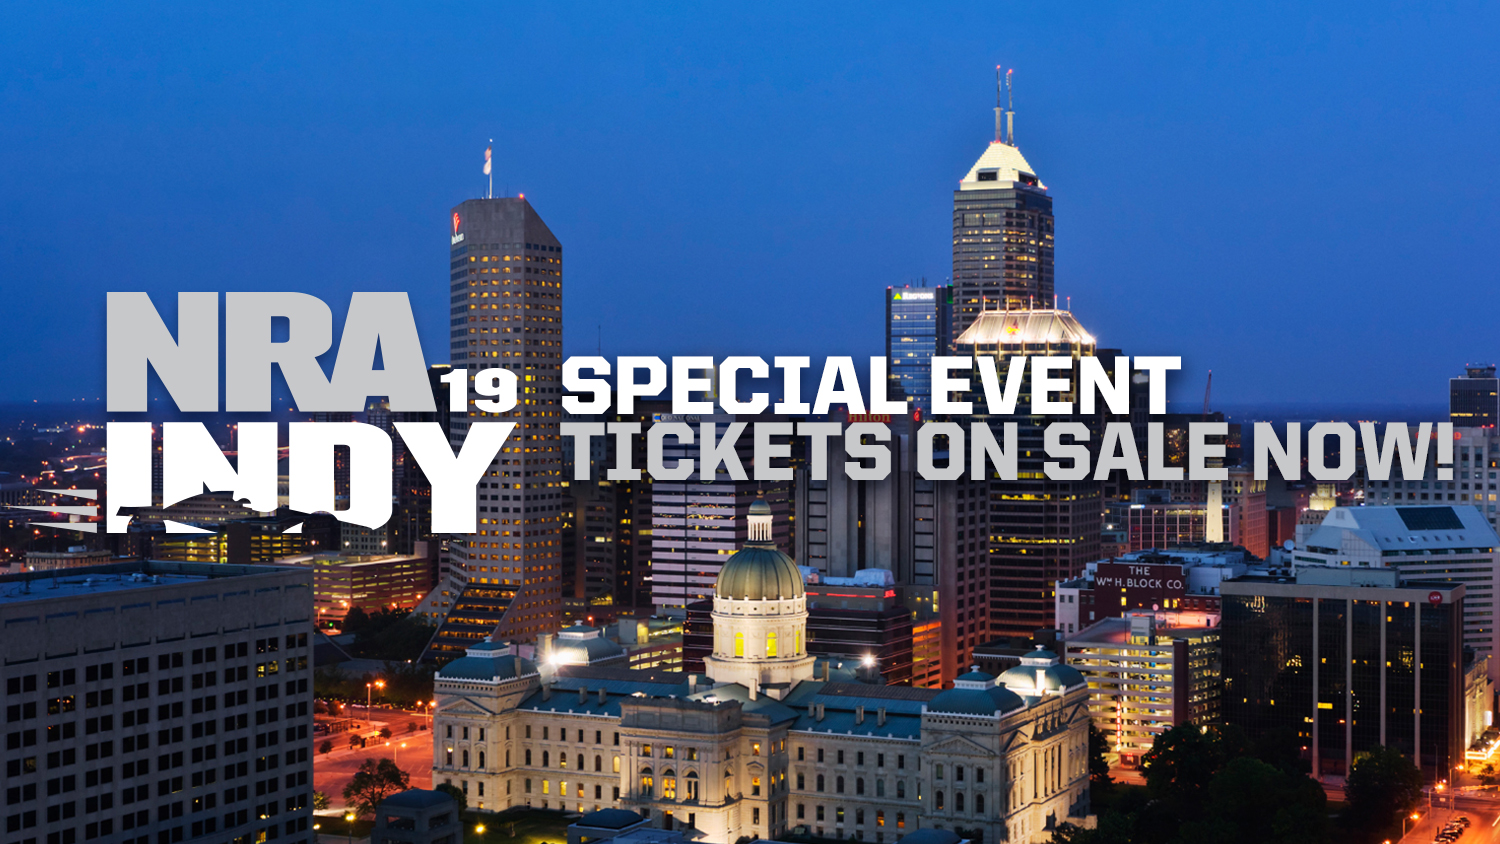 Tickets On Sale Now for Special Events at NRAAM in Indy!